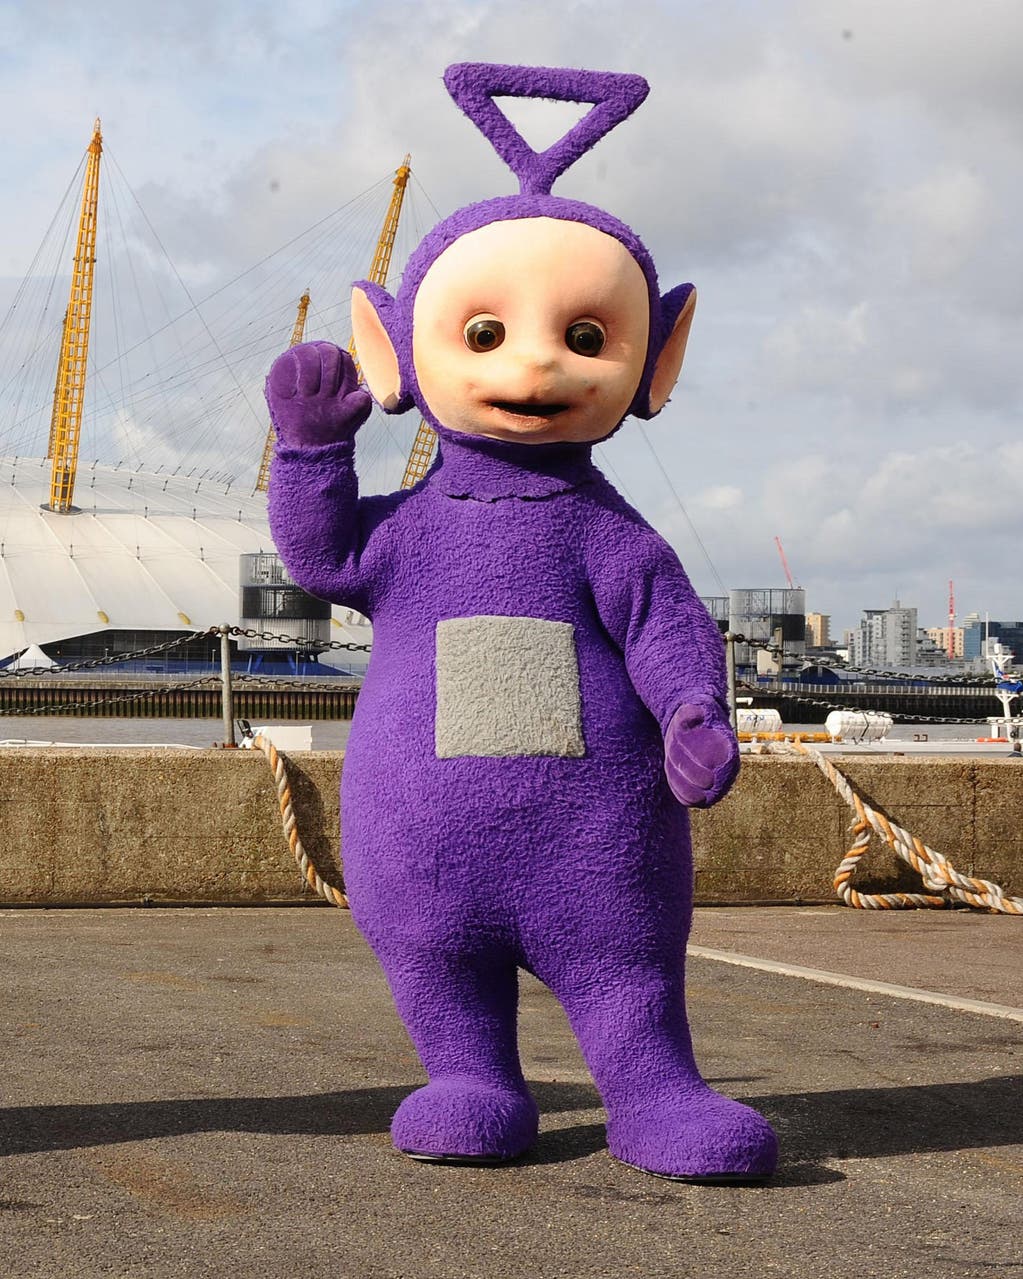 Teletubbies actor died from alcohol intoxication and hypothermia, inquest f...